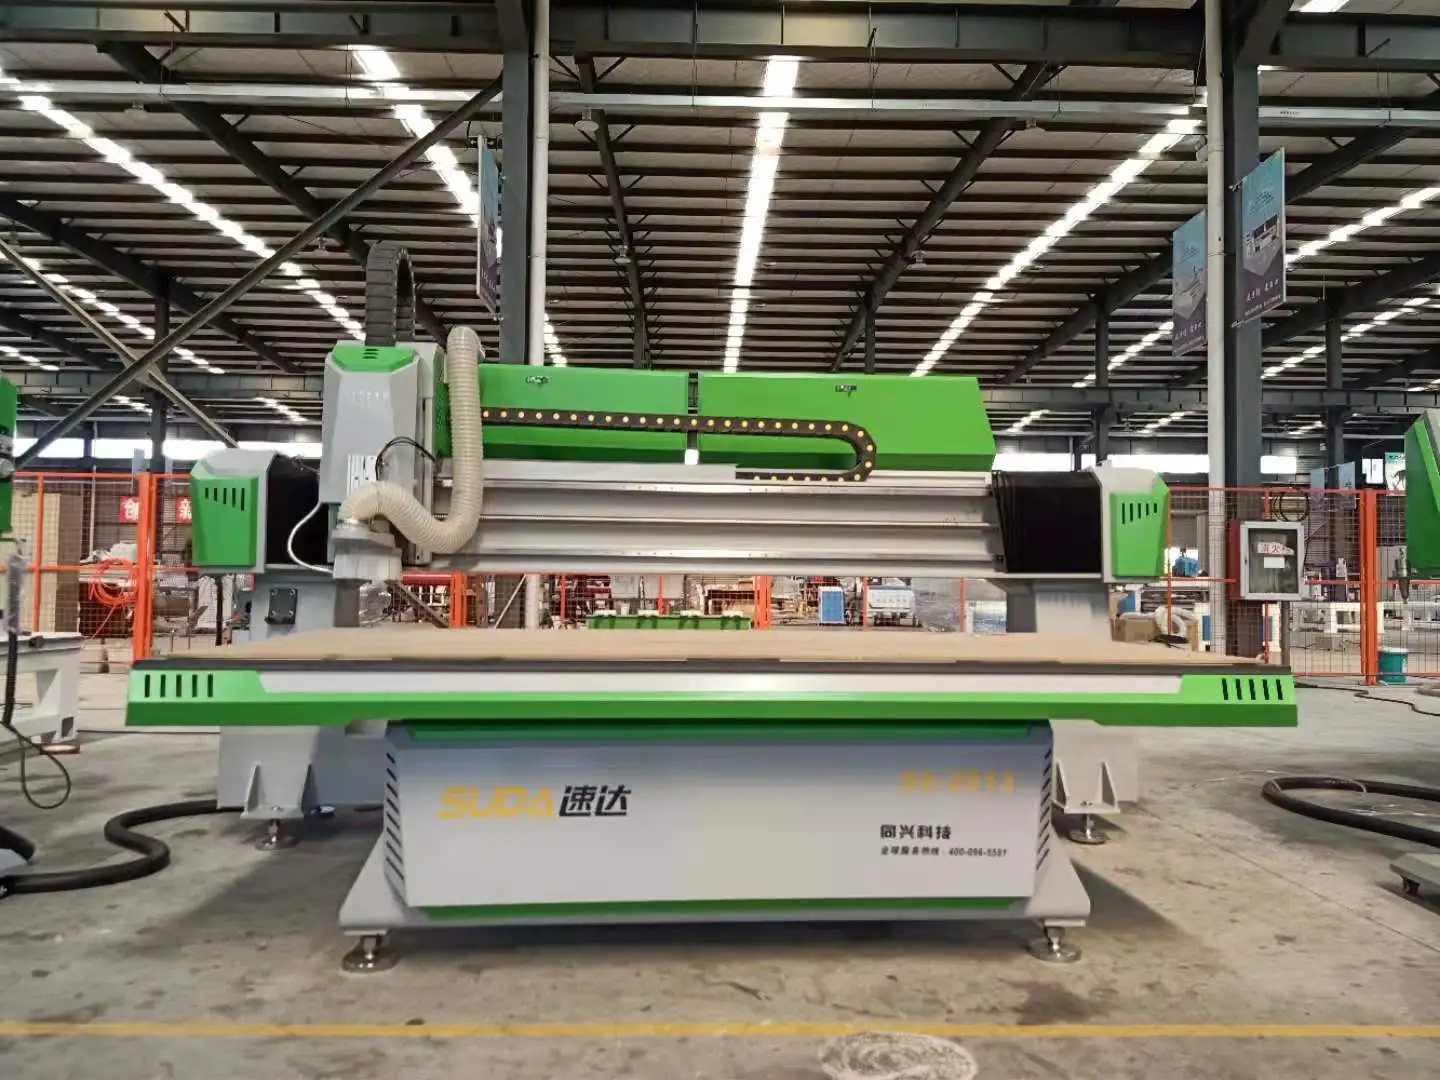 
SUDA Professional 7.5KW Water Cooled ATC and Vacuum Table 1325 2040 CNC Router Machine With CE ISO Certificates 